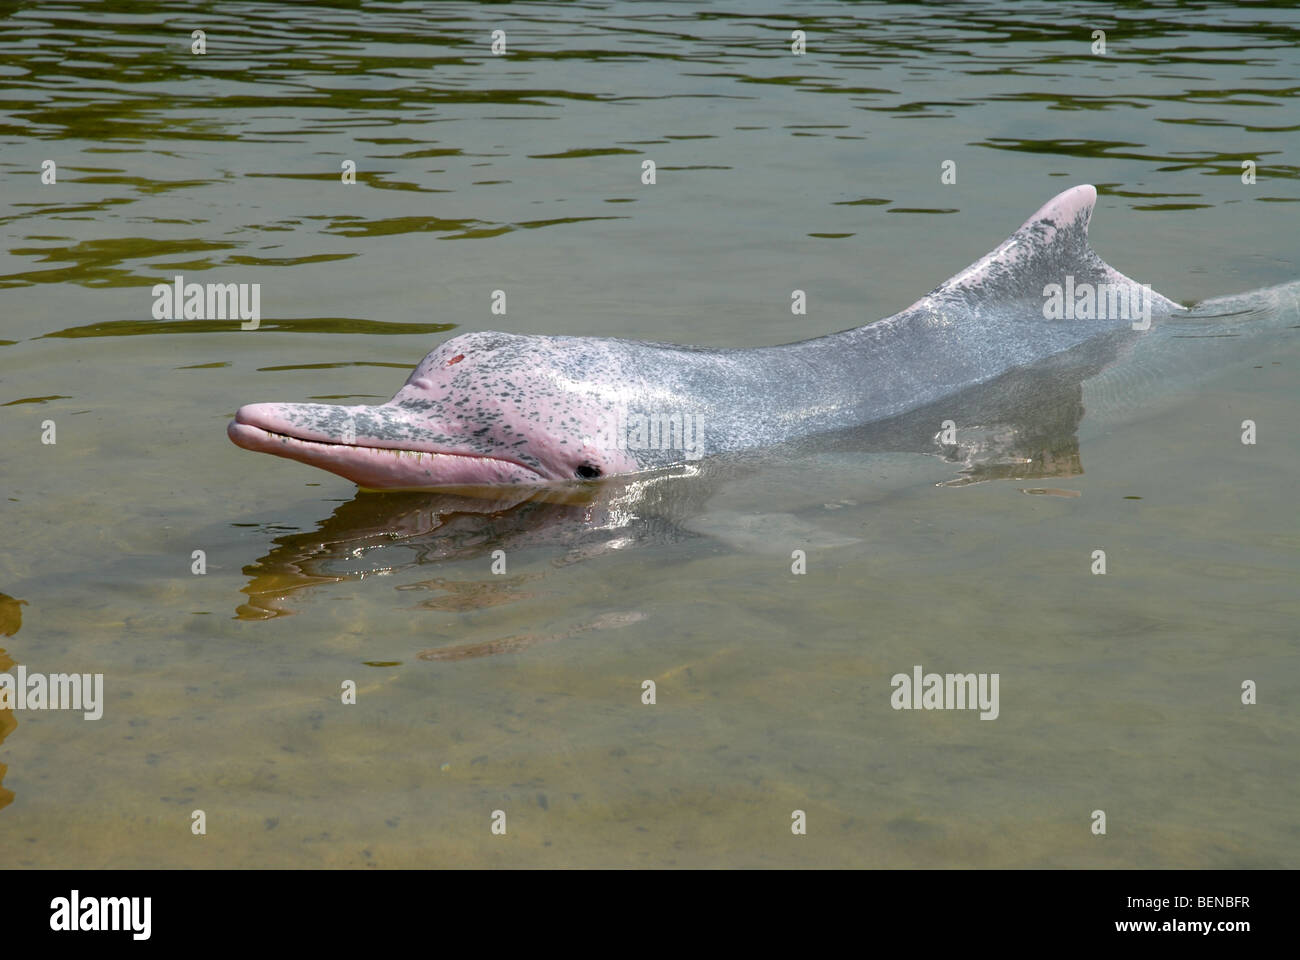 Indo-Pacific Humpback Dolphin, or Pink Dolphin, Dolphin Lagoon, Sentosa Island, Singapore Stock Photo